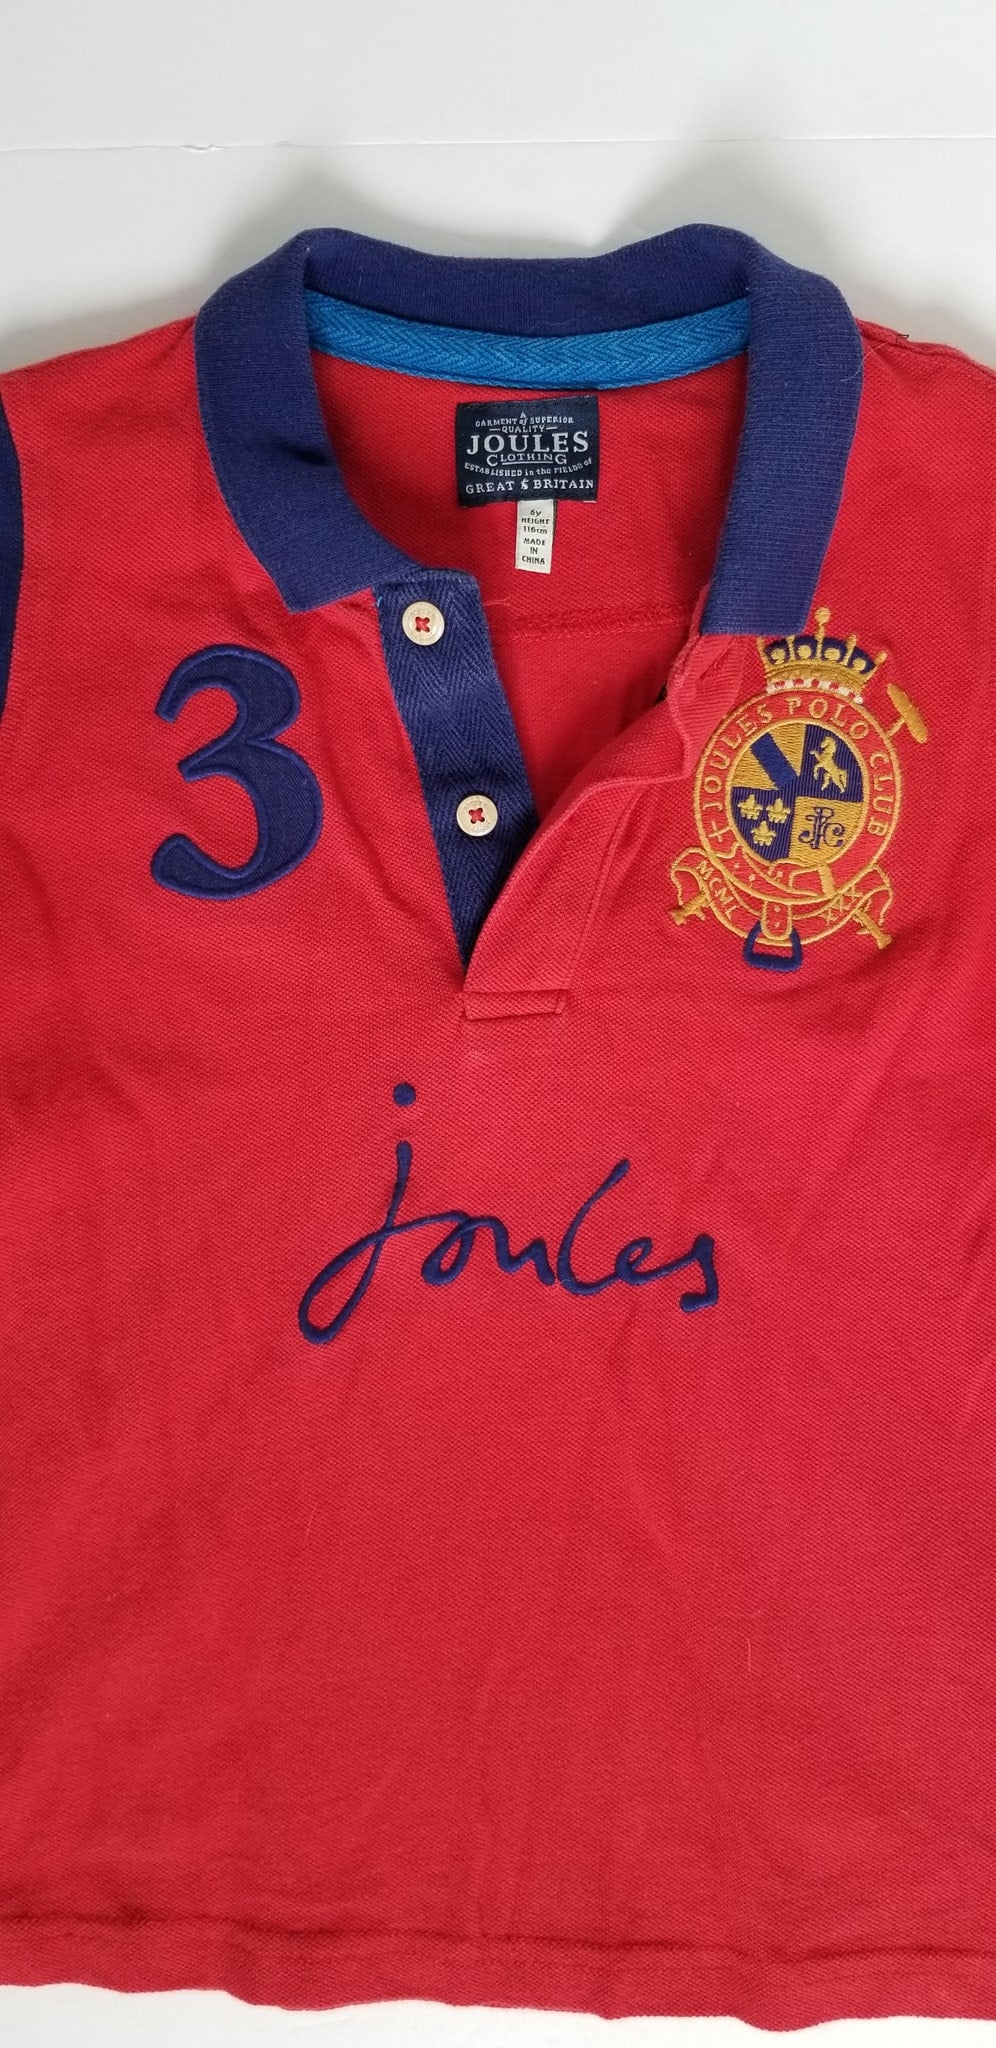 Joules Polo Shirt - Red - Youth 6 Years